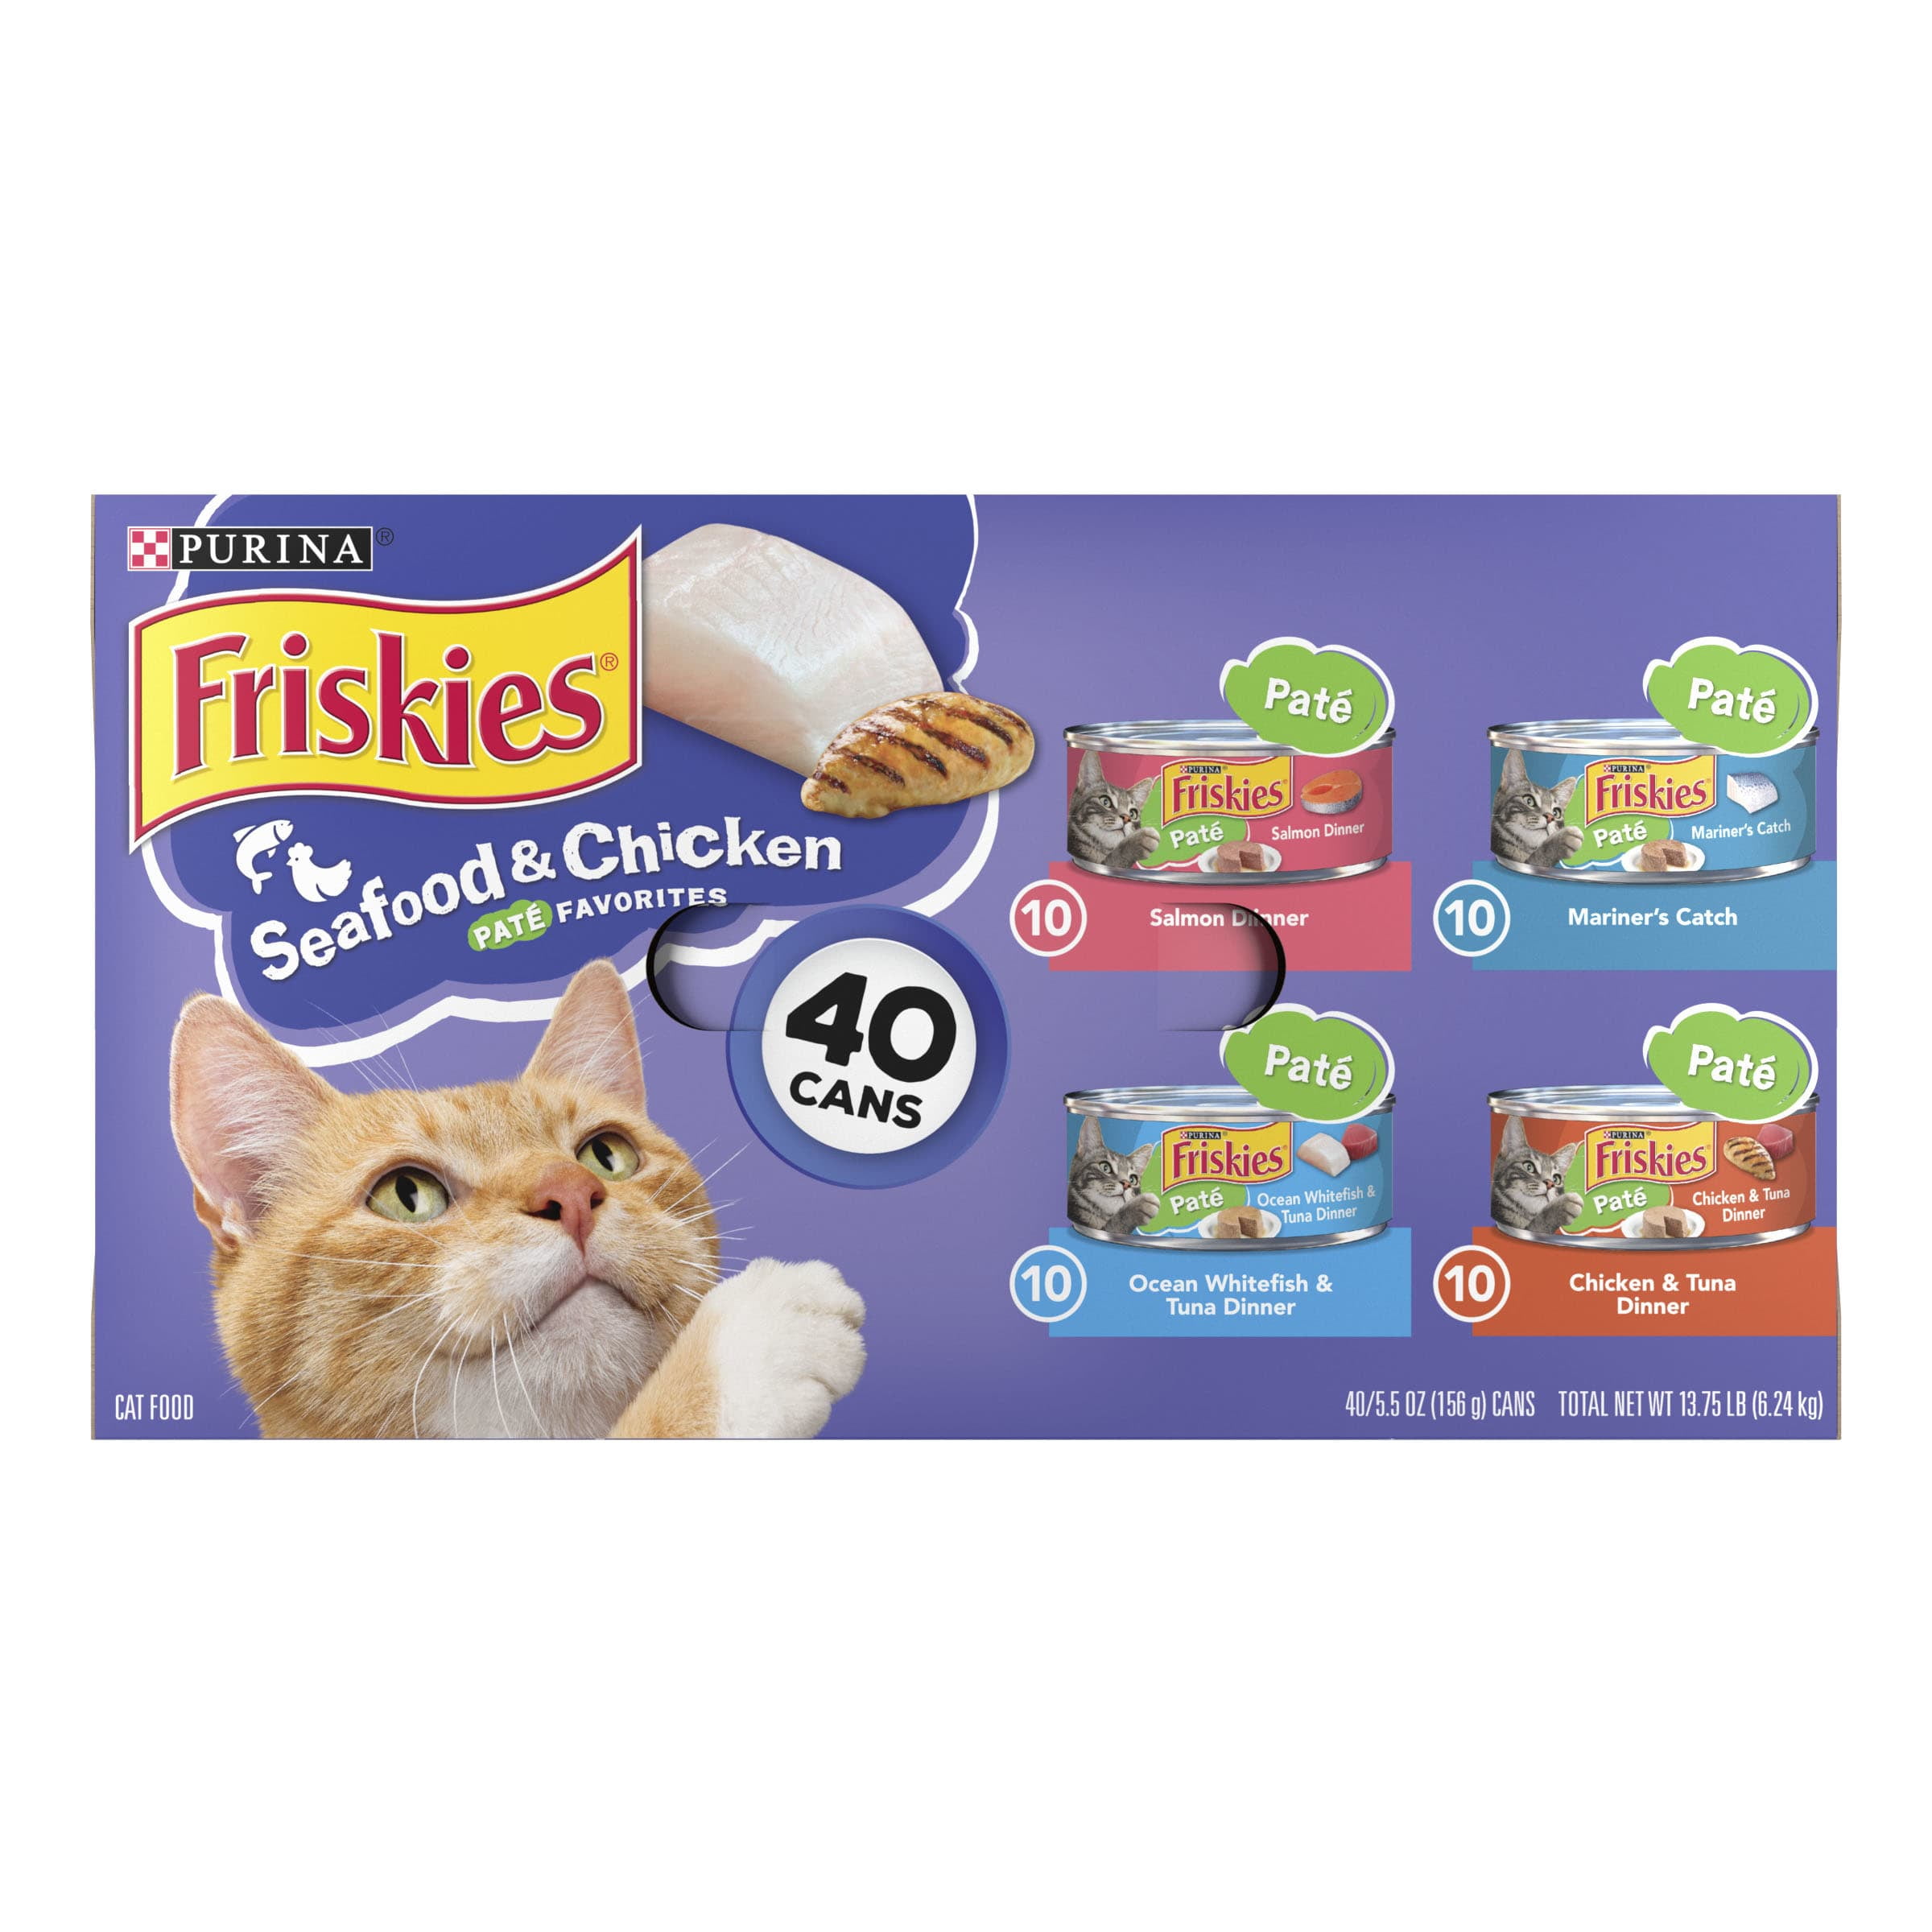 Purina Friskies Pate Wet Cat Food, Soft Seafood & Chicken Variety Pack, 5.5 oz Cans (40 Pack)